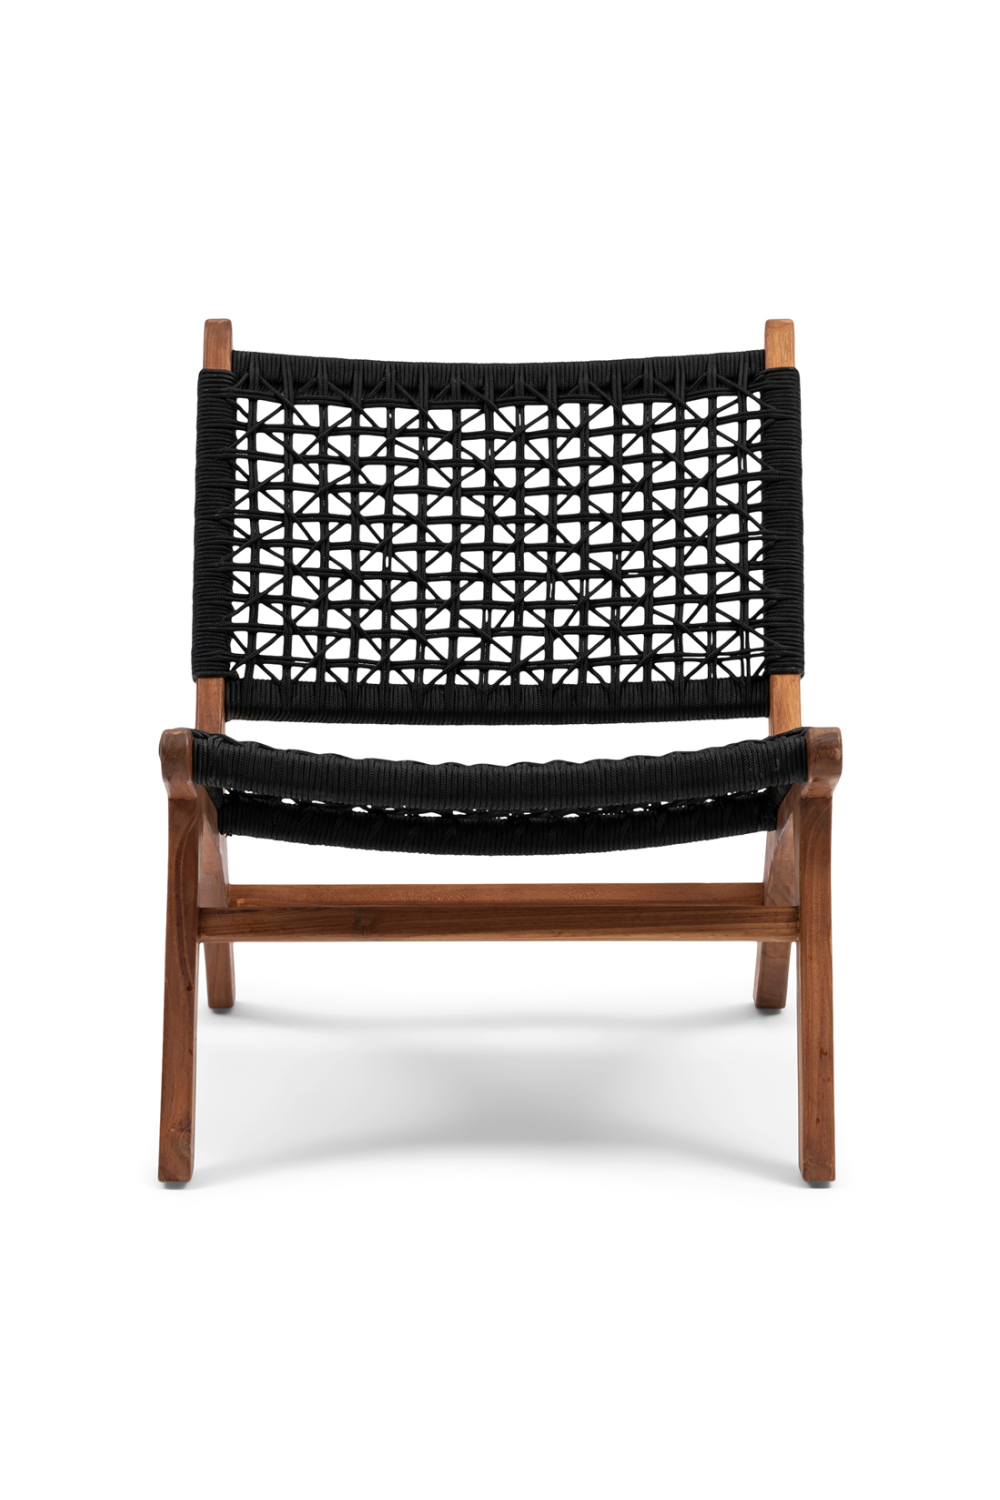 Rope Outdoor Lounge Chair | Rivièra Maison | Wood Furniture